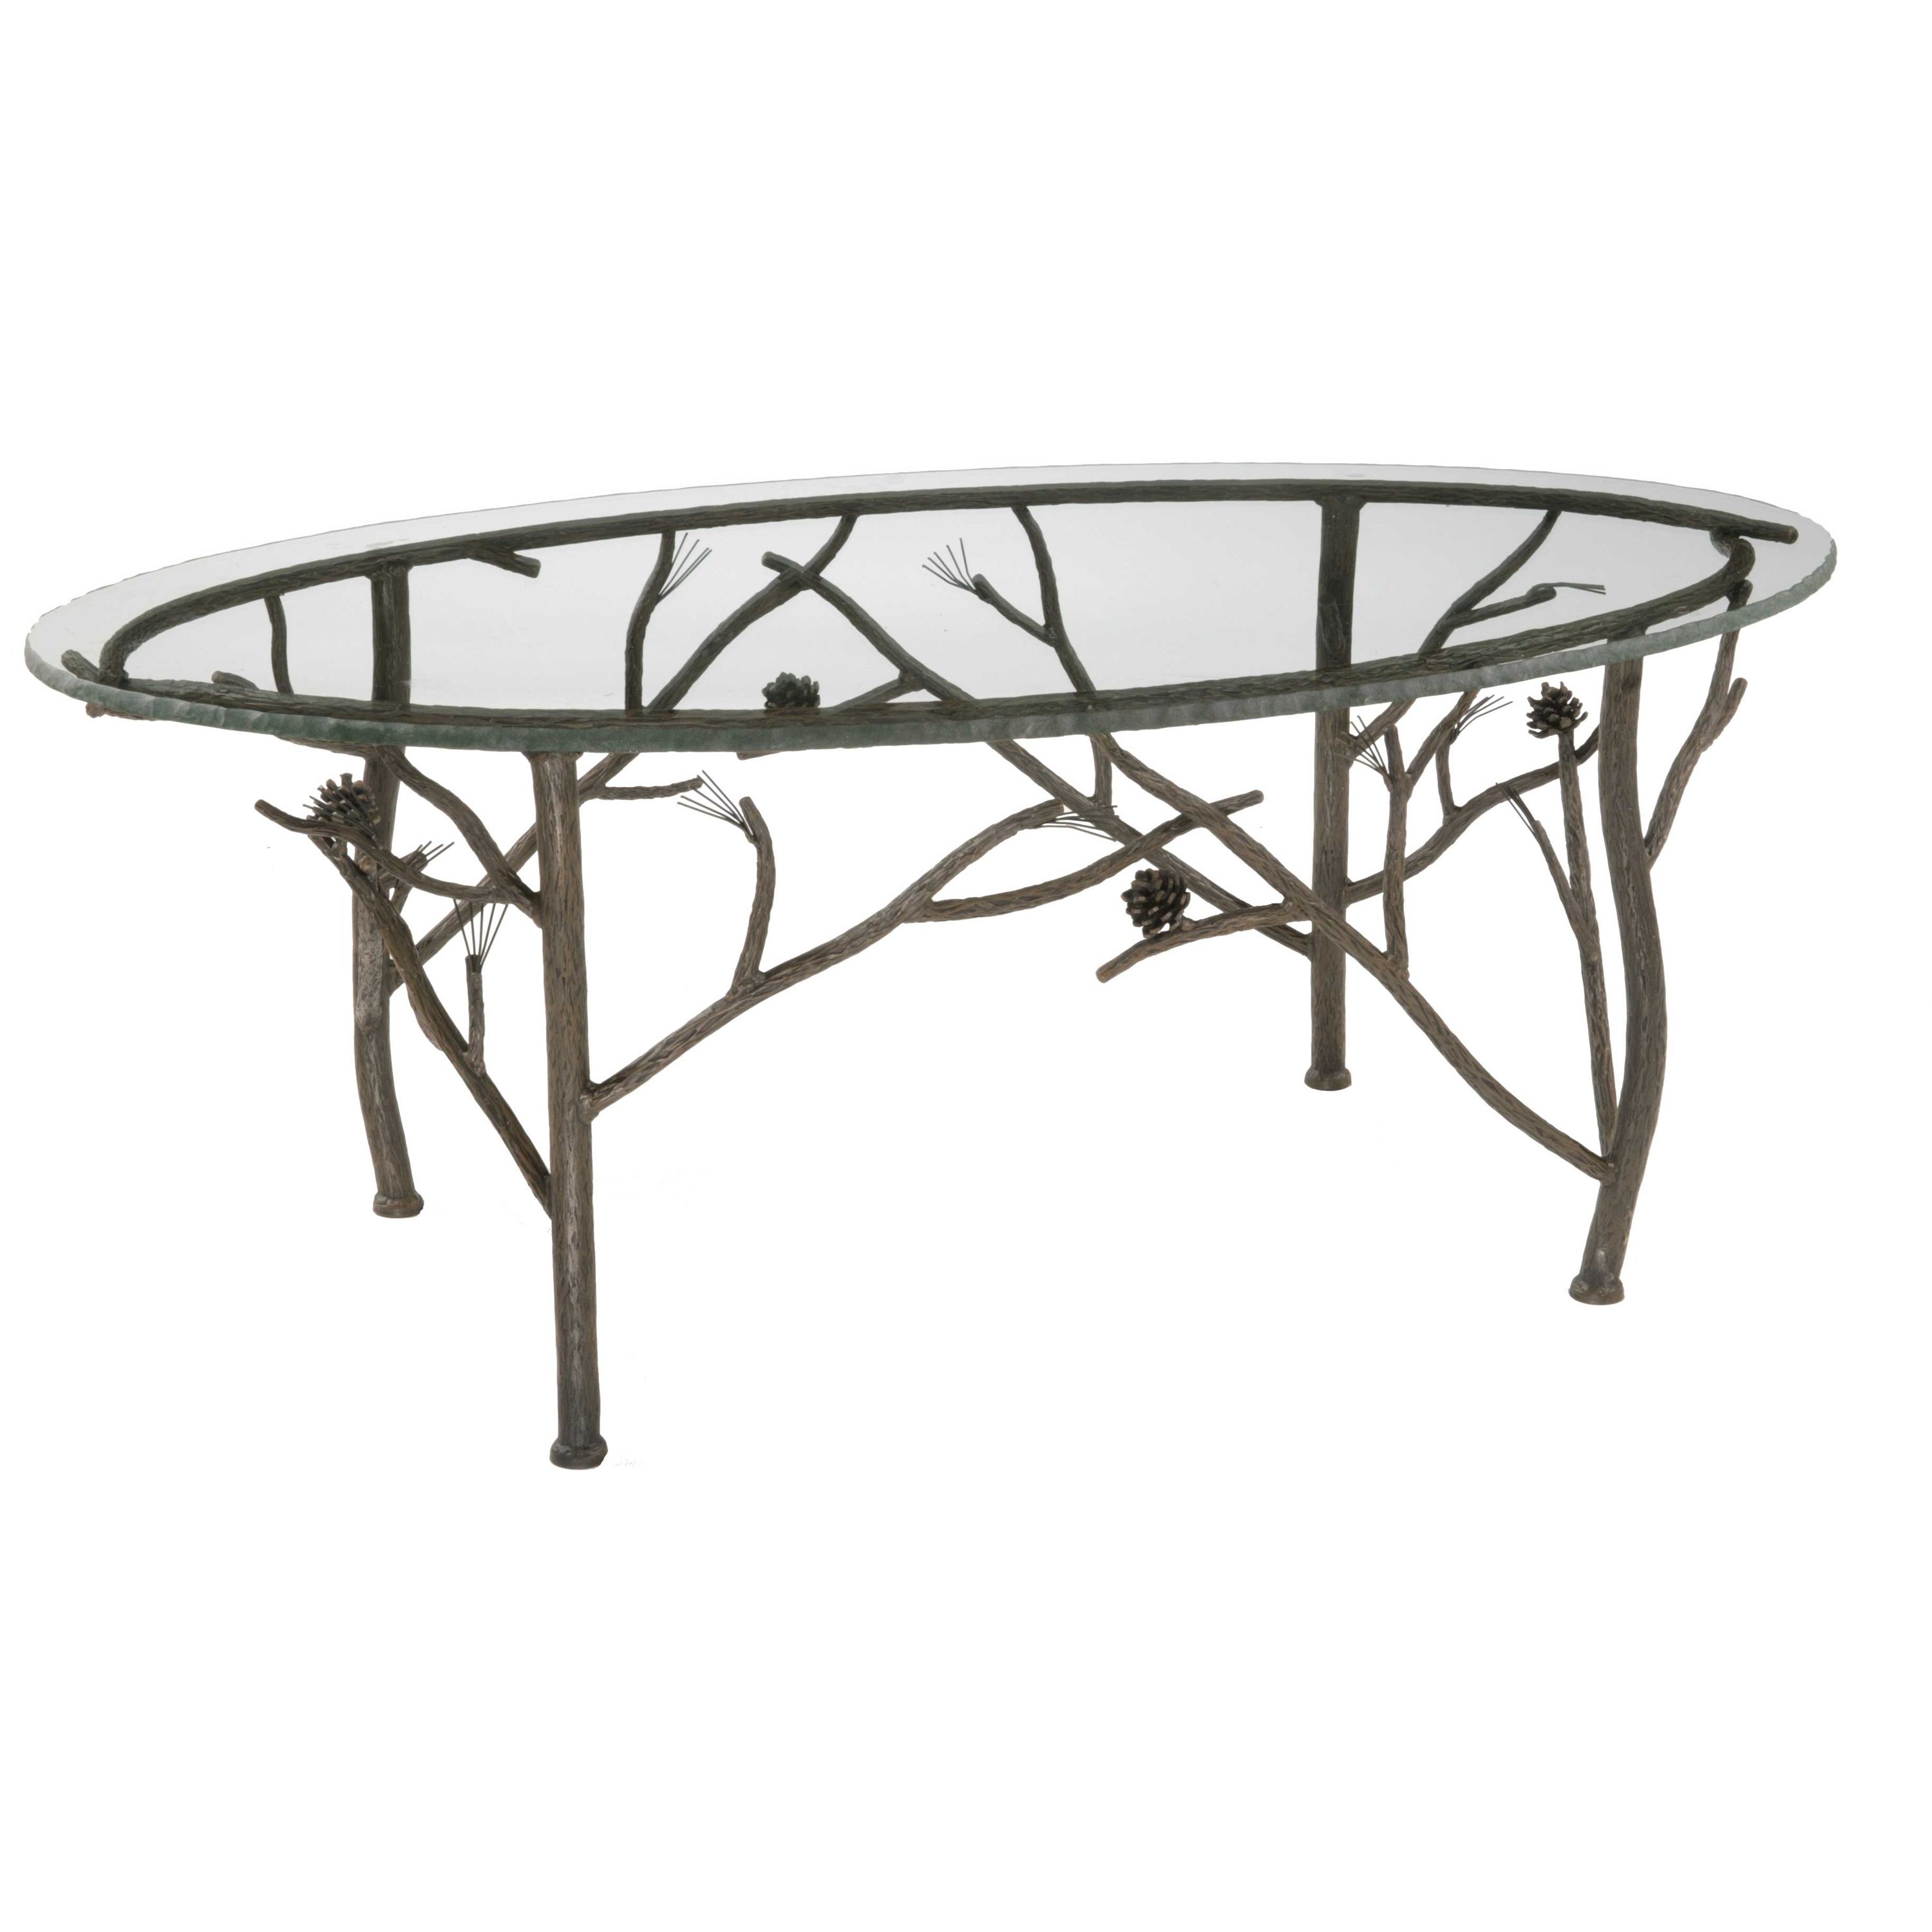 The Popular Wrought Iron Coffee Tables Elegant Round Wrought Iron Coffee Table Glass And Iron Coffee Tables Outdoor Wrought Iron Coffee Table (View 8 of 10)